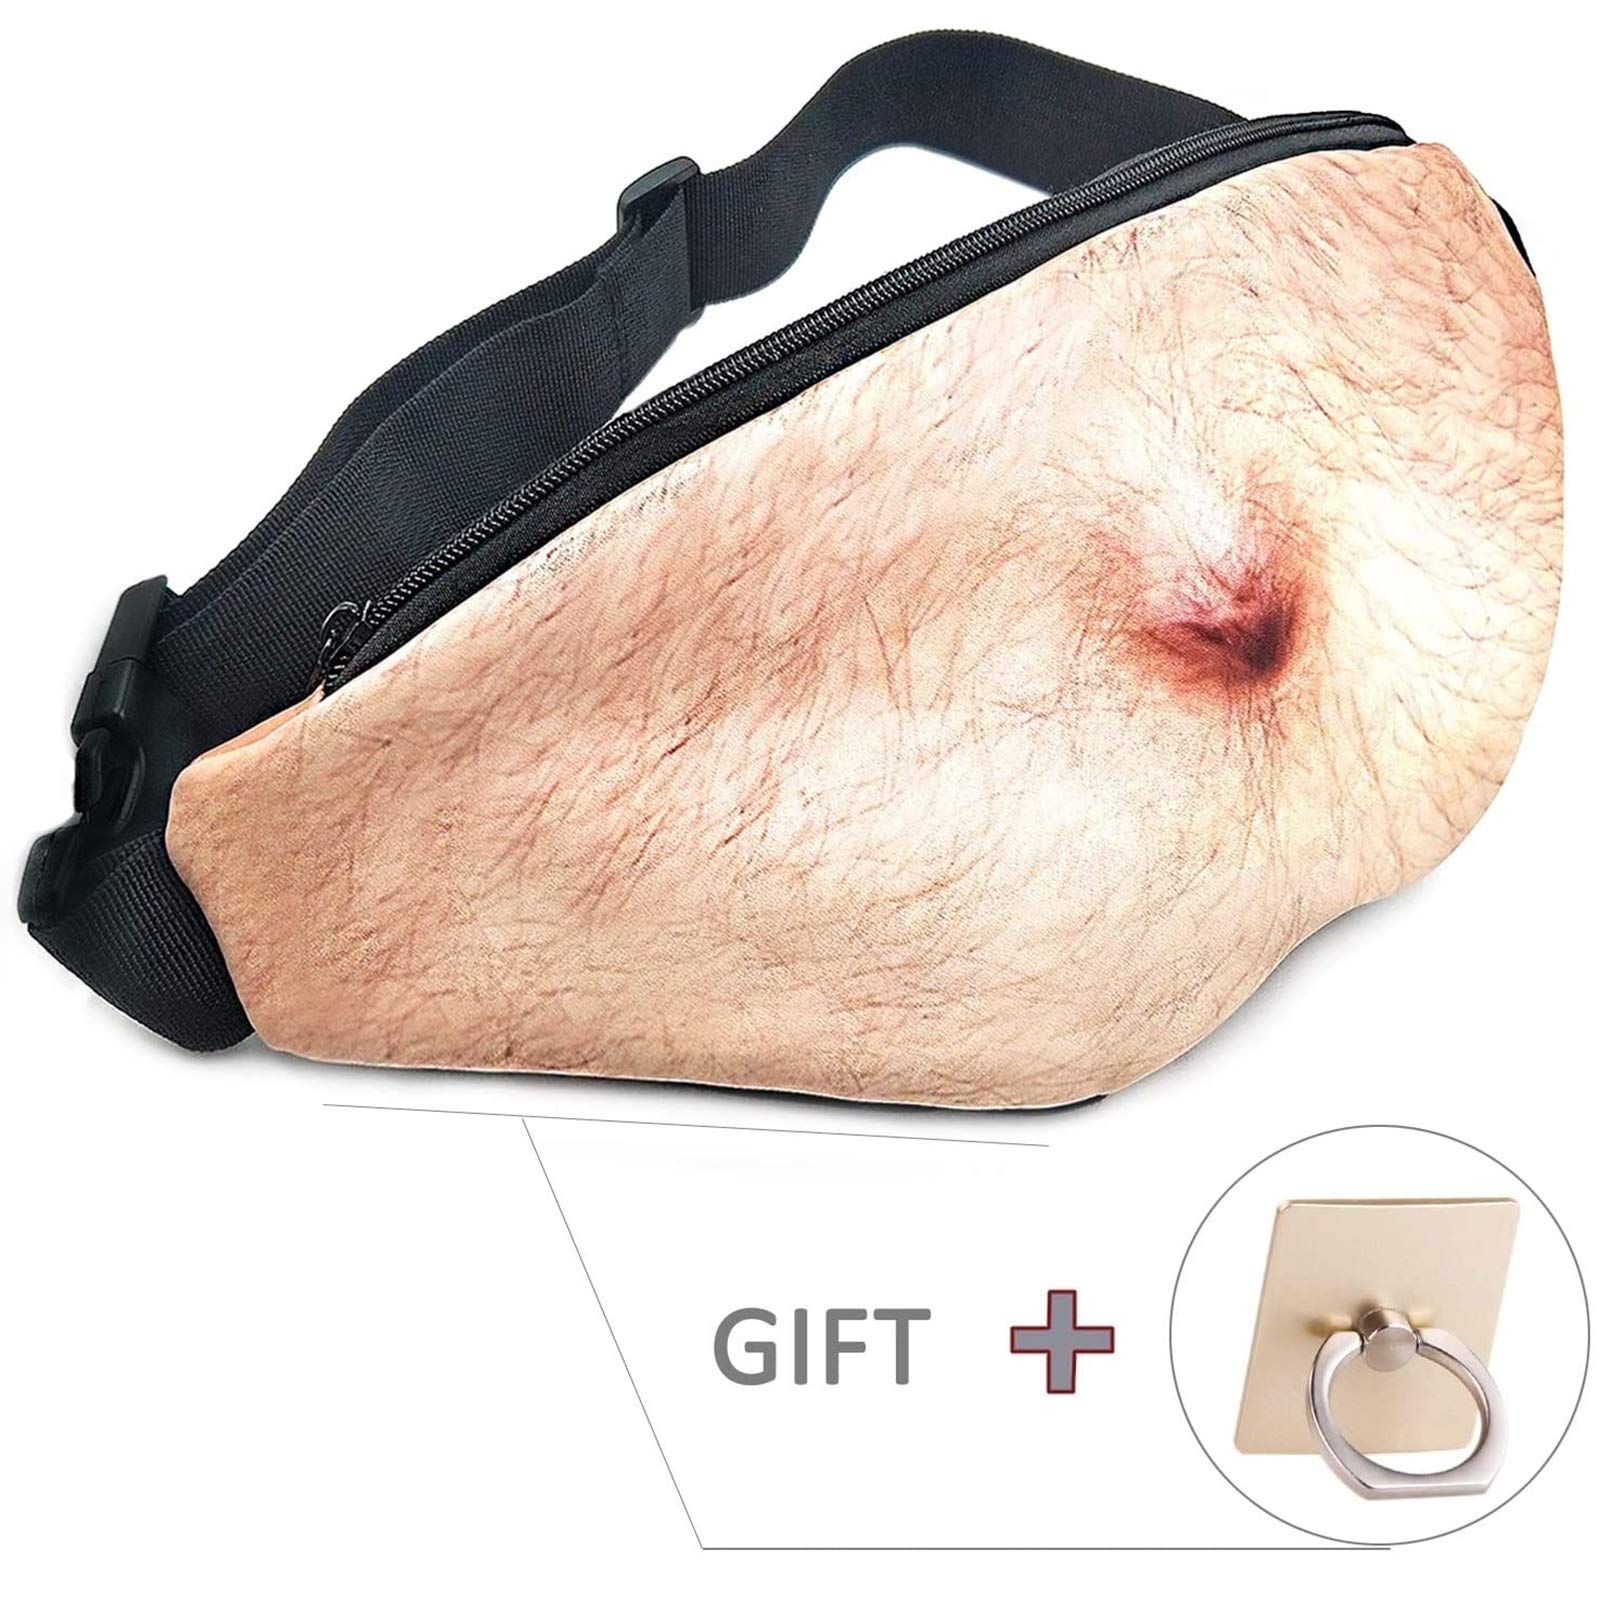 Dad Bag Fanny Pack Gifts-3D Men Beer Belly Waist Packs, White Elephant Gifts Exchange Waterproof Fanny Pack Unisex Funny Gag Gifts for Father's Day, Christmas